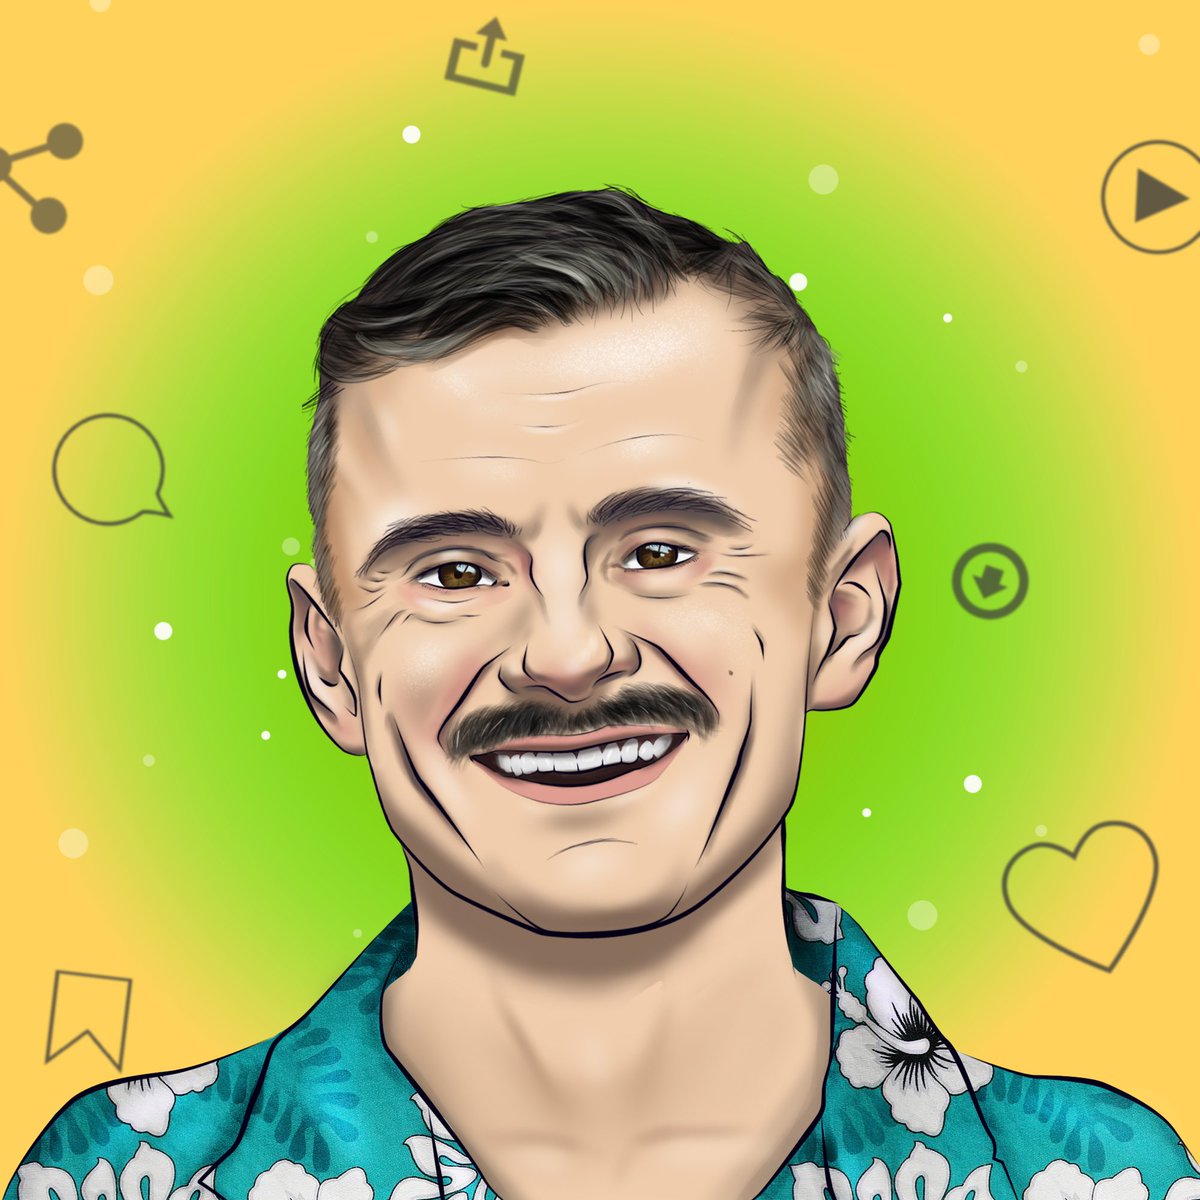 Day 3 of However many we need to reach @garyvee Yo @garyvee we know you're busy and all, but quick question. Beard or mustache? #NFT #NFTCommunity #NFTartist #nftart #NFTCollection #NFTCollection